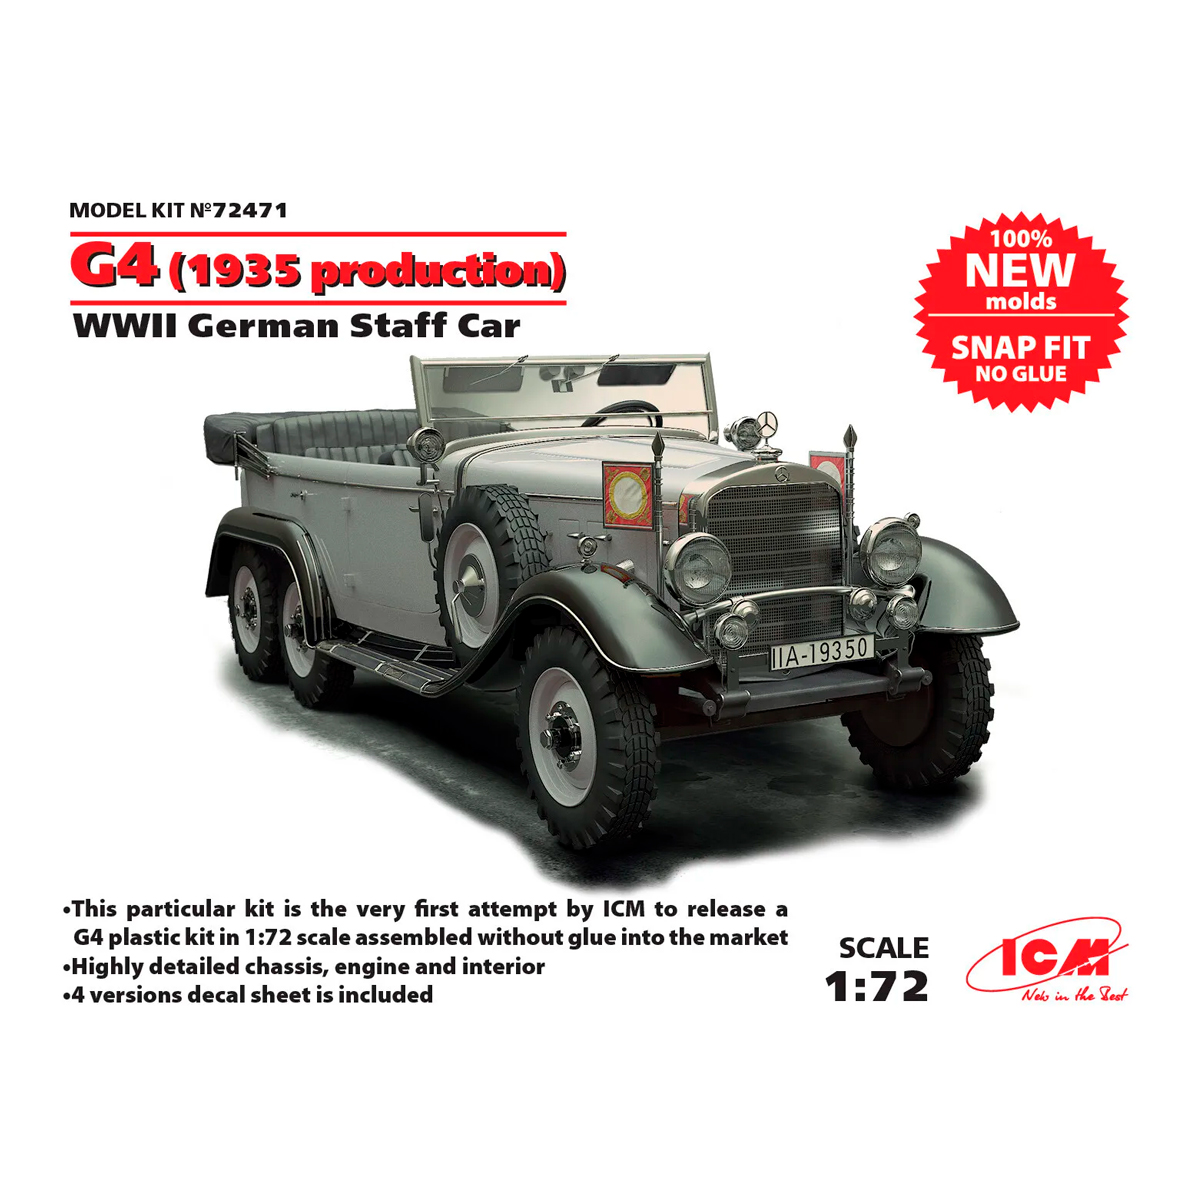 G4 (1935 production), WWII German Staff Car,  snap fit 1/72